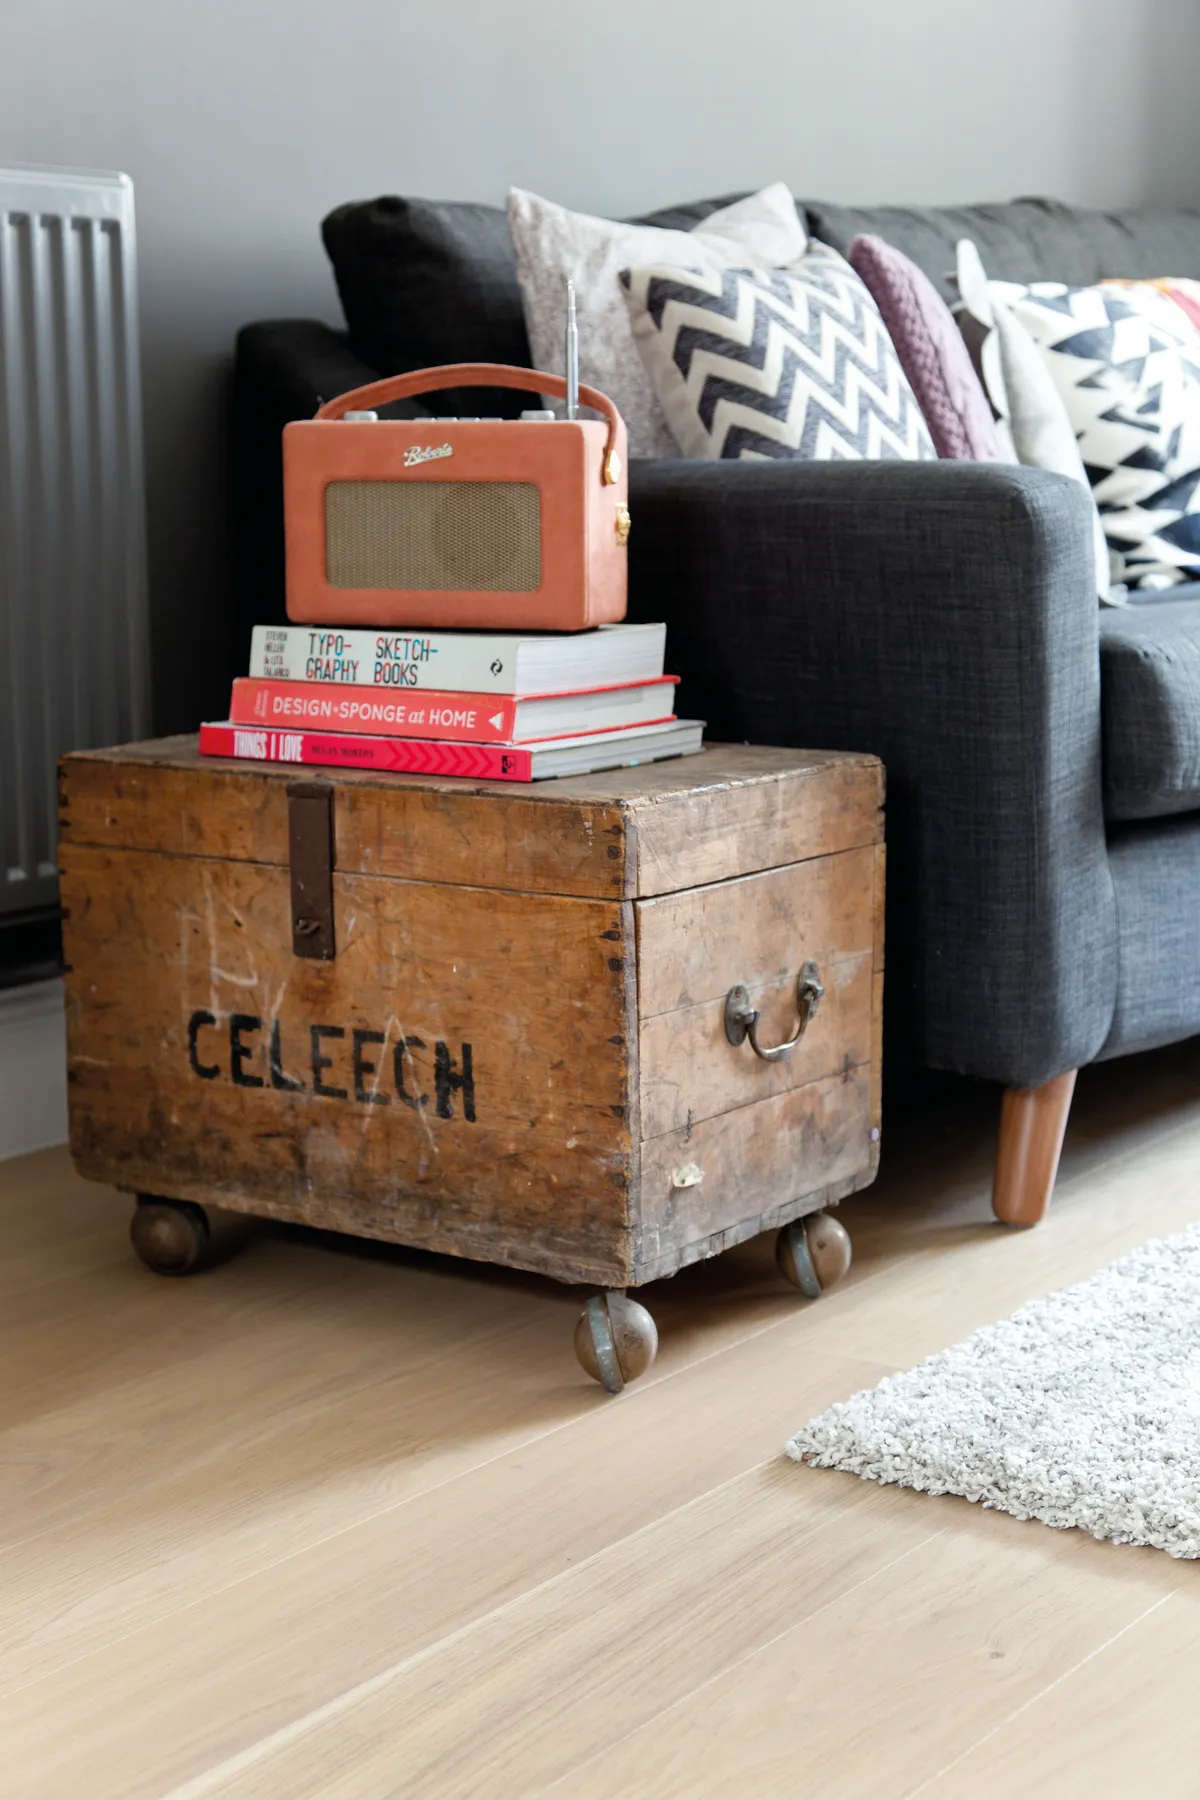 A vintage trunk with books and an orange digital radio on top